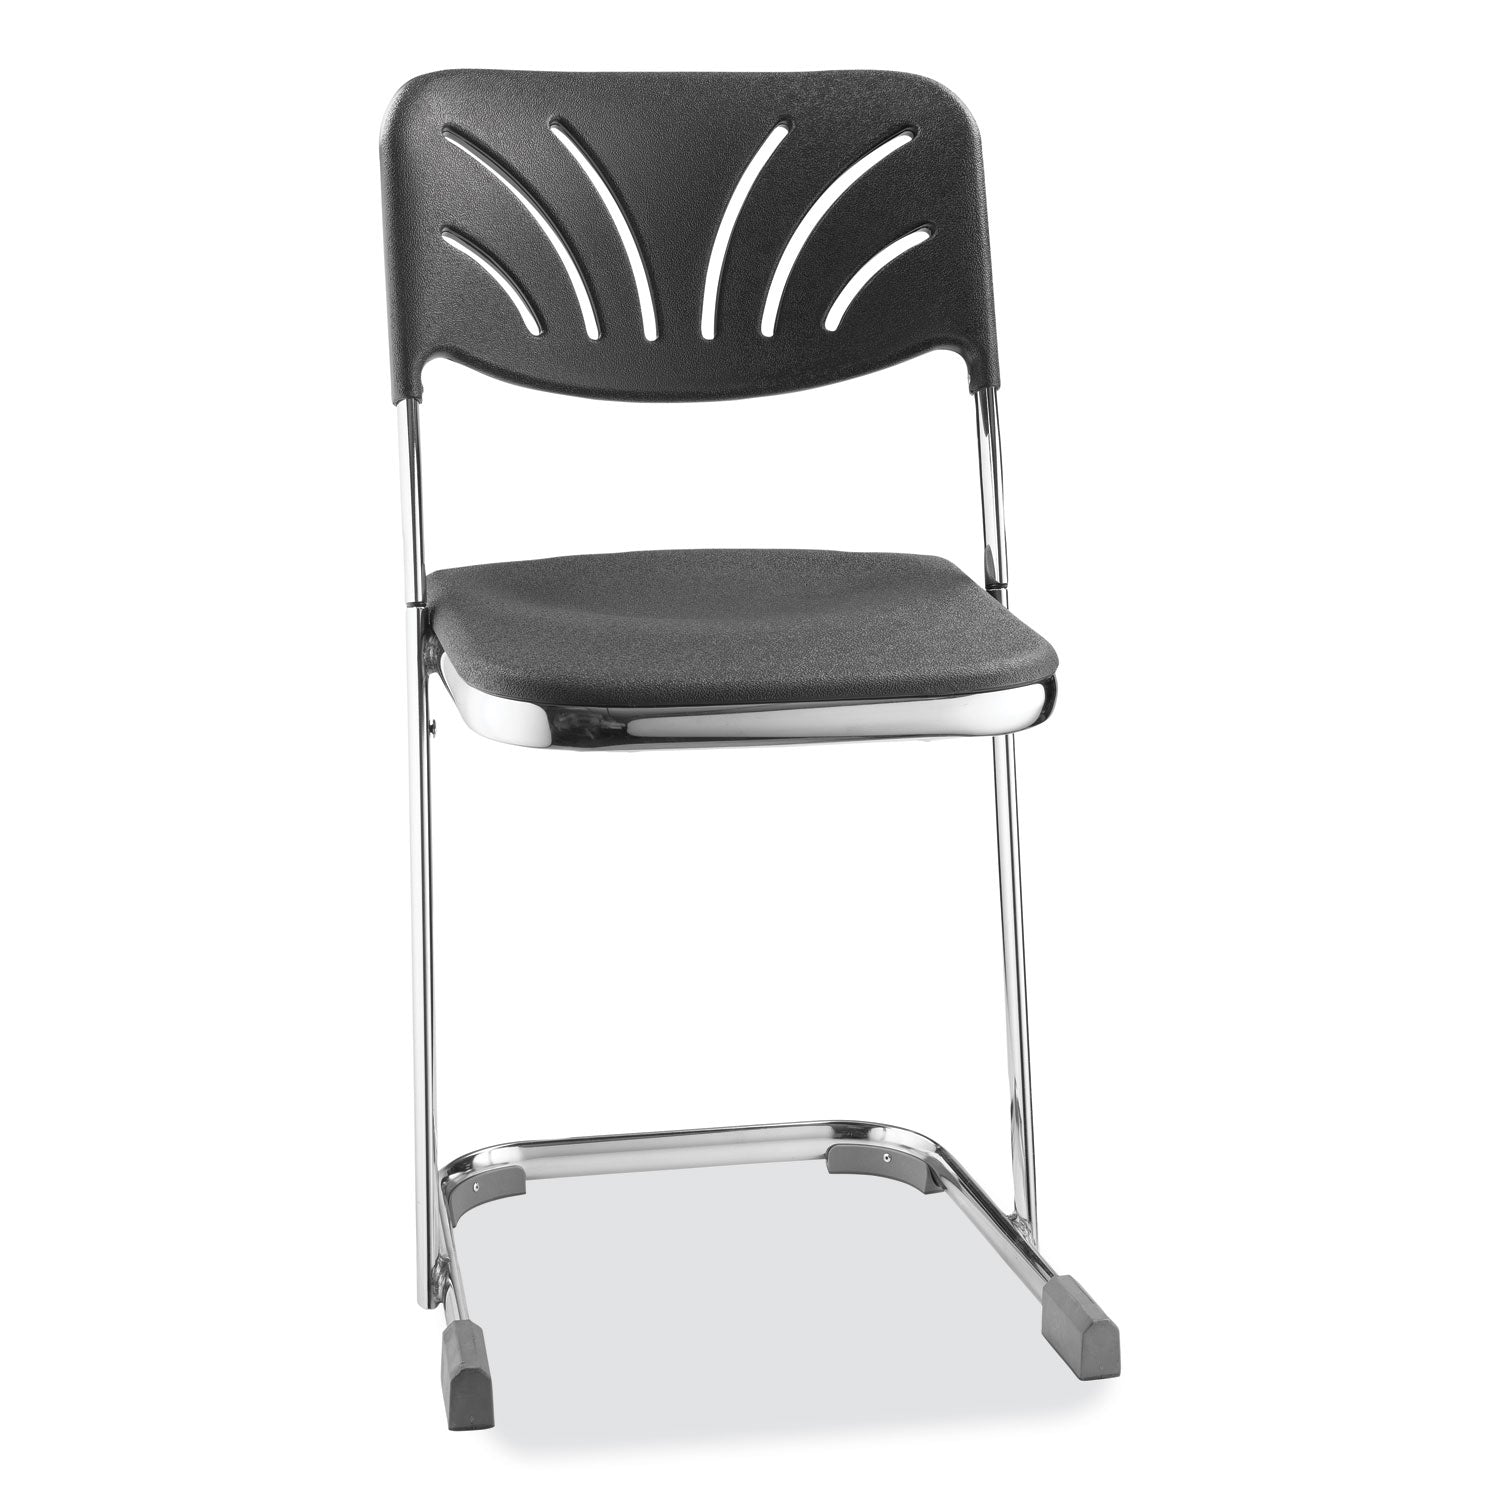 6600-series-elephant-z-stool-with-backrest-supports-500-lb-18-seat-ht-black-seat-back-chrome-frameships-in-1-3-bus-days_nps6618b - 3